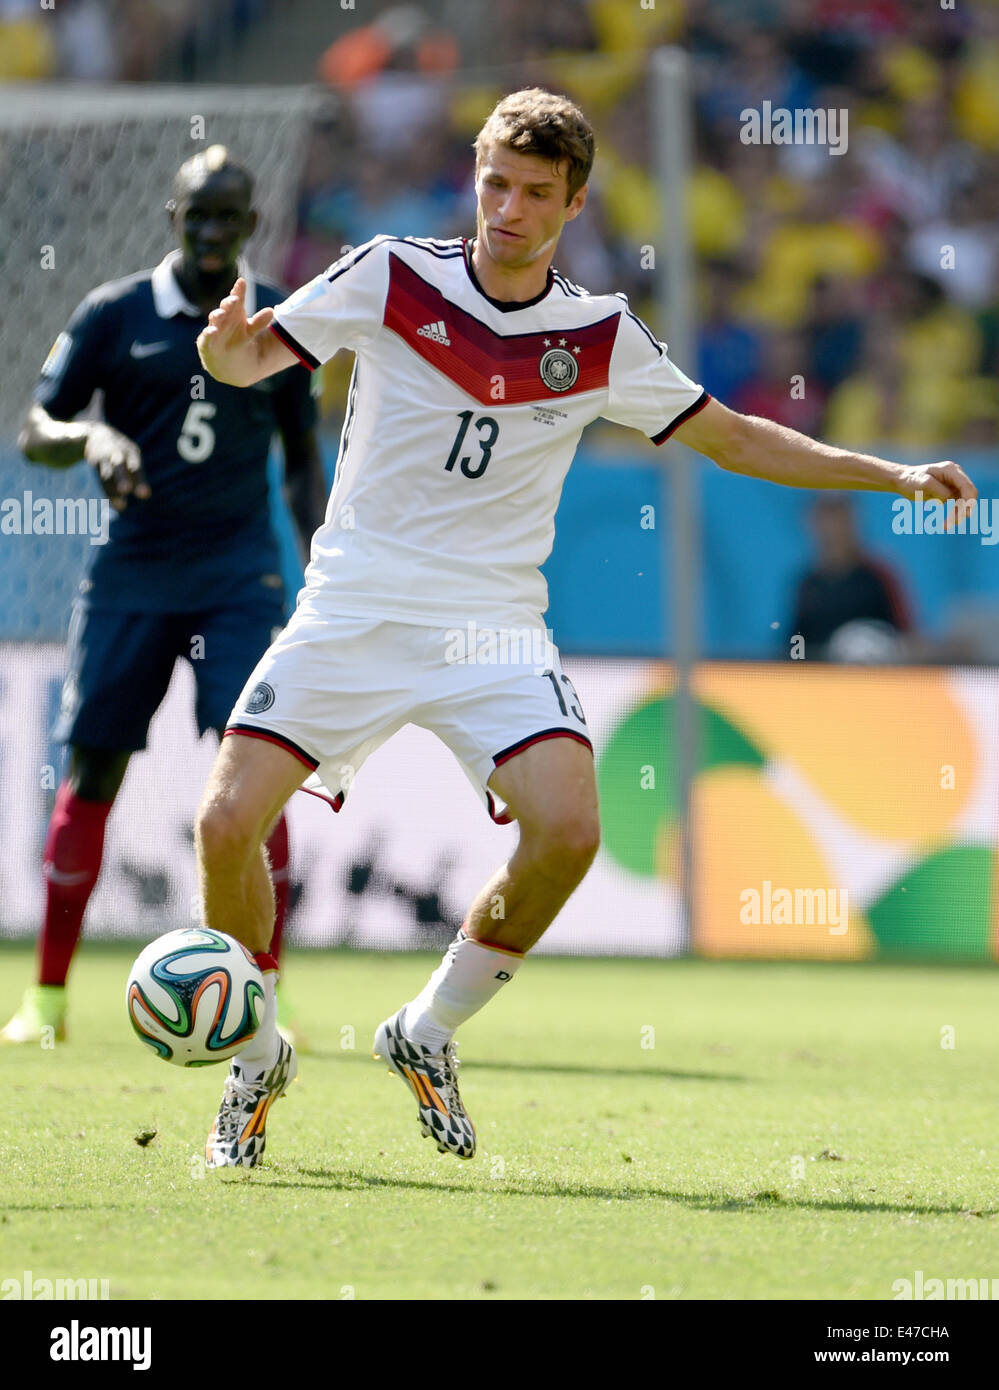 Rio de Janeiro, Brazil. 04th July, 2014. Thomas Mueller (R) of Germany in action during the FIFA World Cup 2014 quarter final soccer match between France and Germany at Estadio do Maracana in Rio de Janeiro, Brazil, 04 July 2014. Photo: Andreas Gebert/dpa/Alamy Live News Stock Photo